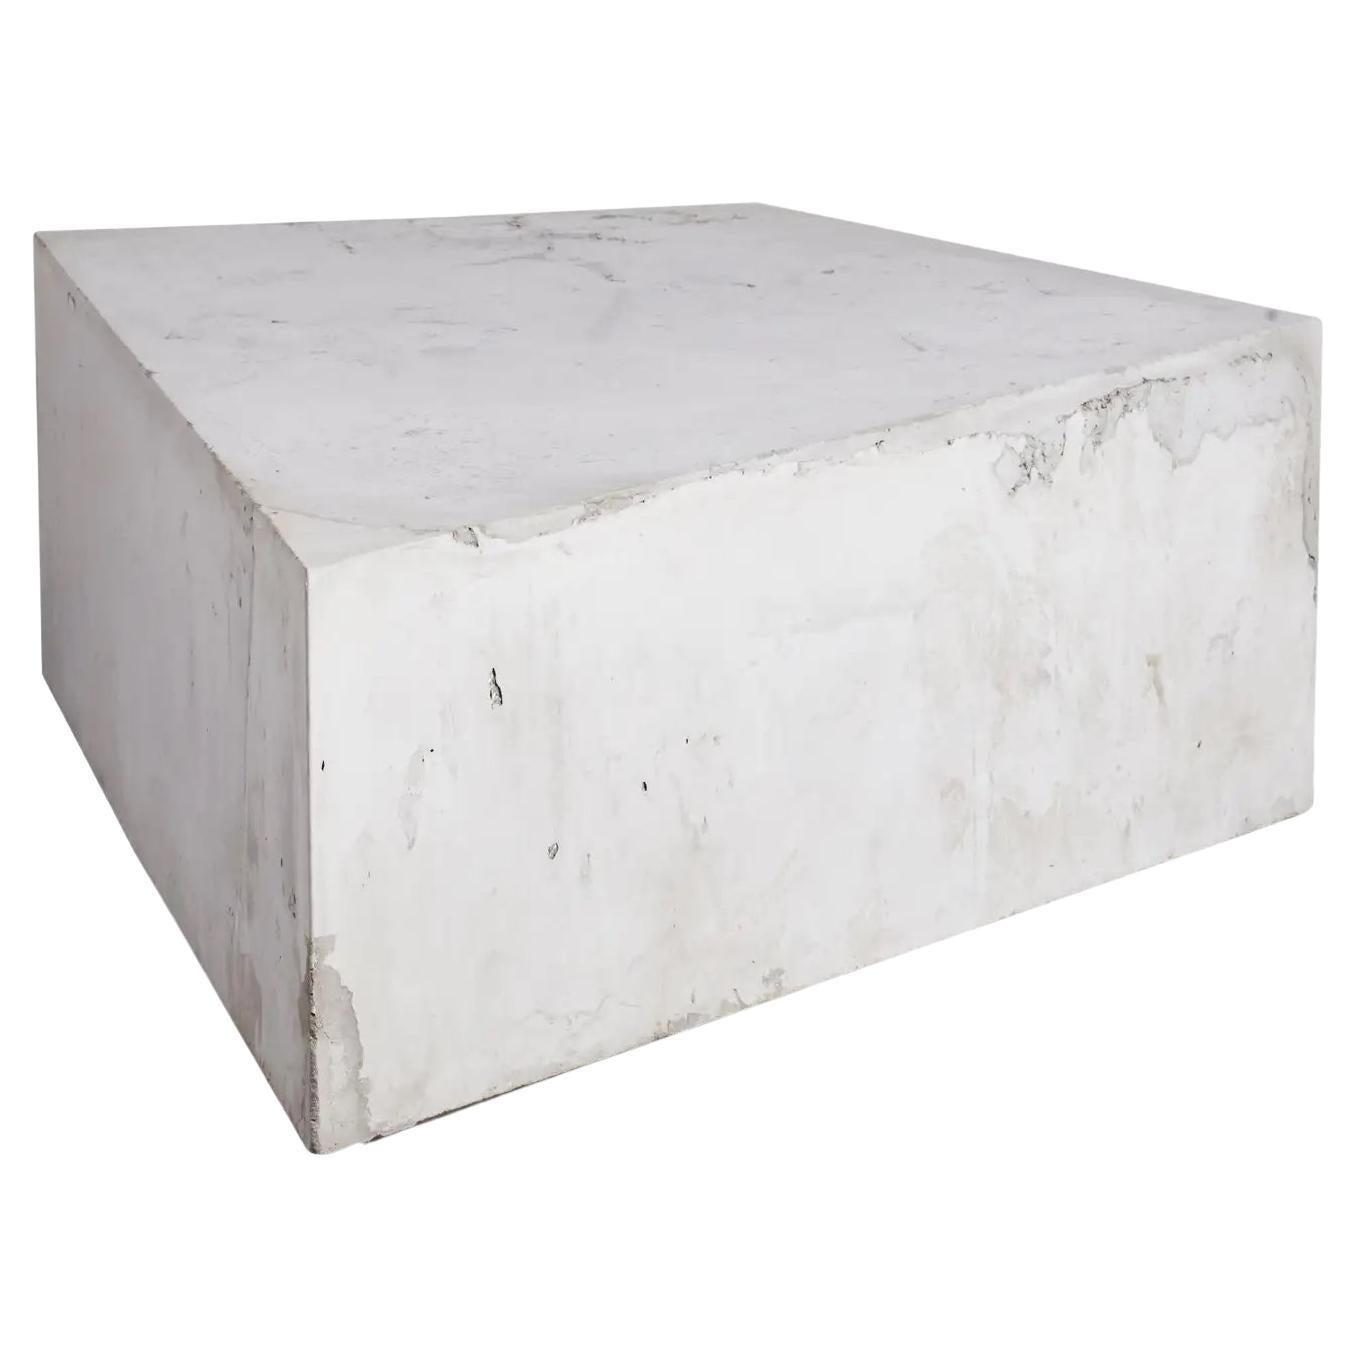 'Goldstein II' Reinforced Concrete One-Off Artwork/Table by Littlewhitehead For Sale